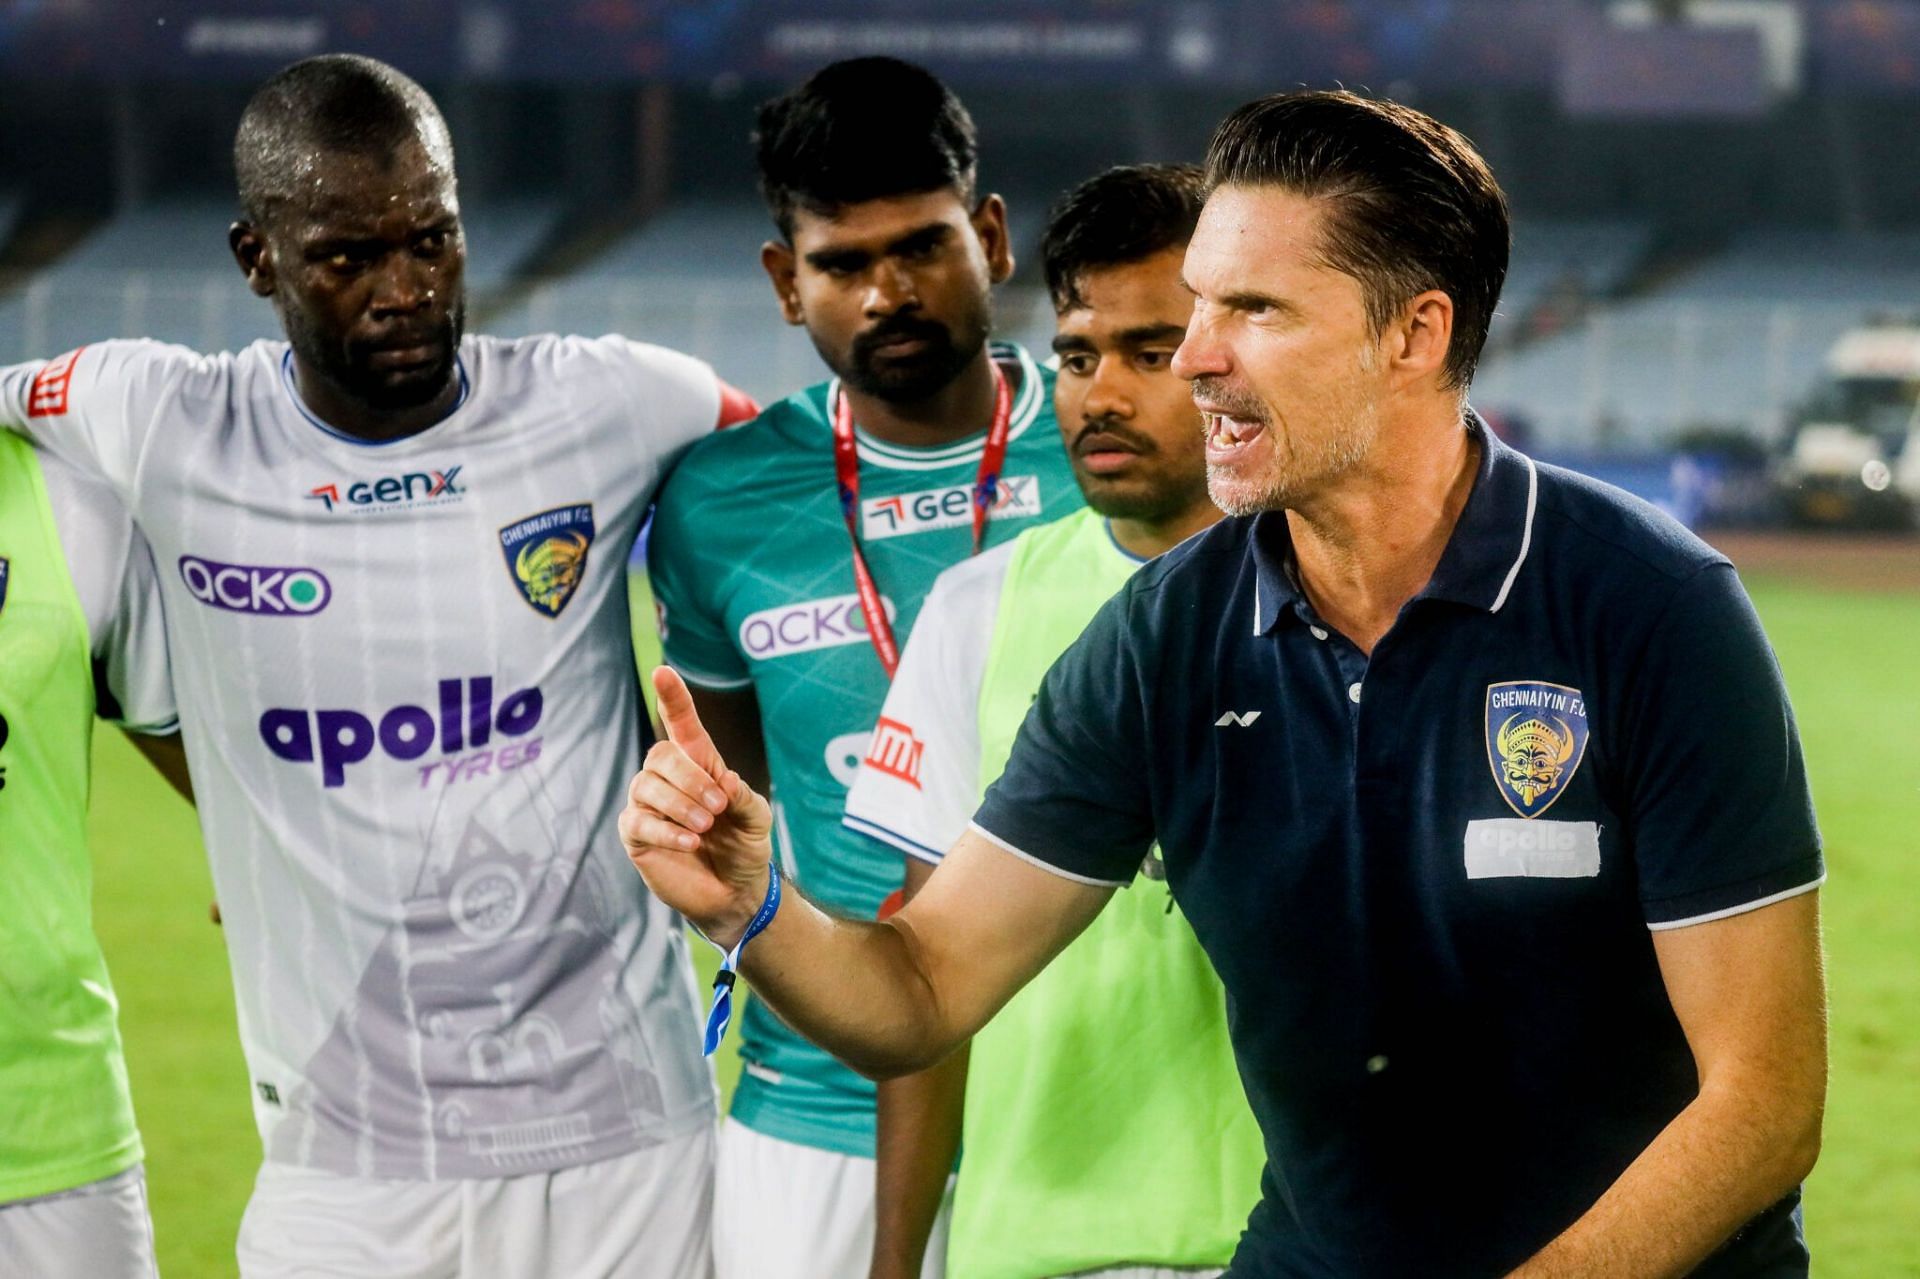 Chennaiyin FC coach Thomas Brdaric speaks to his players after their win against East Bengal earlier this season. [Credits: CFC official website]